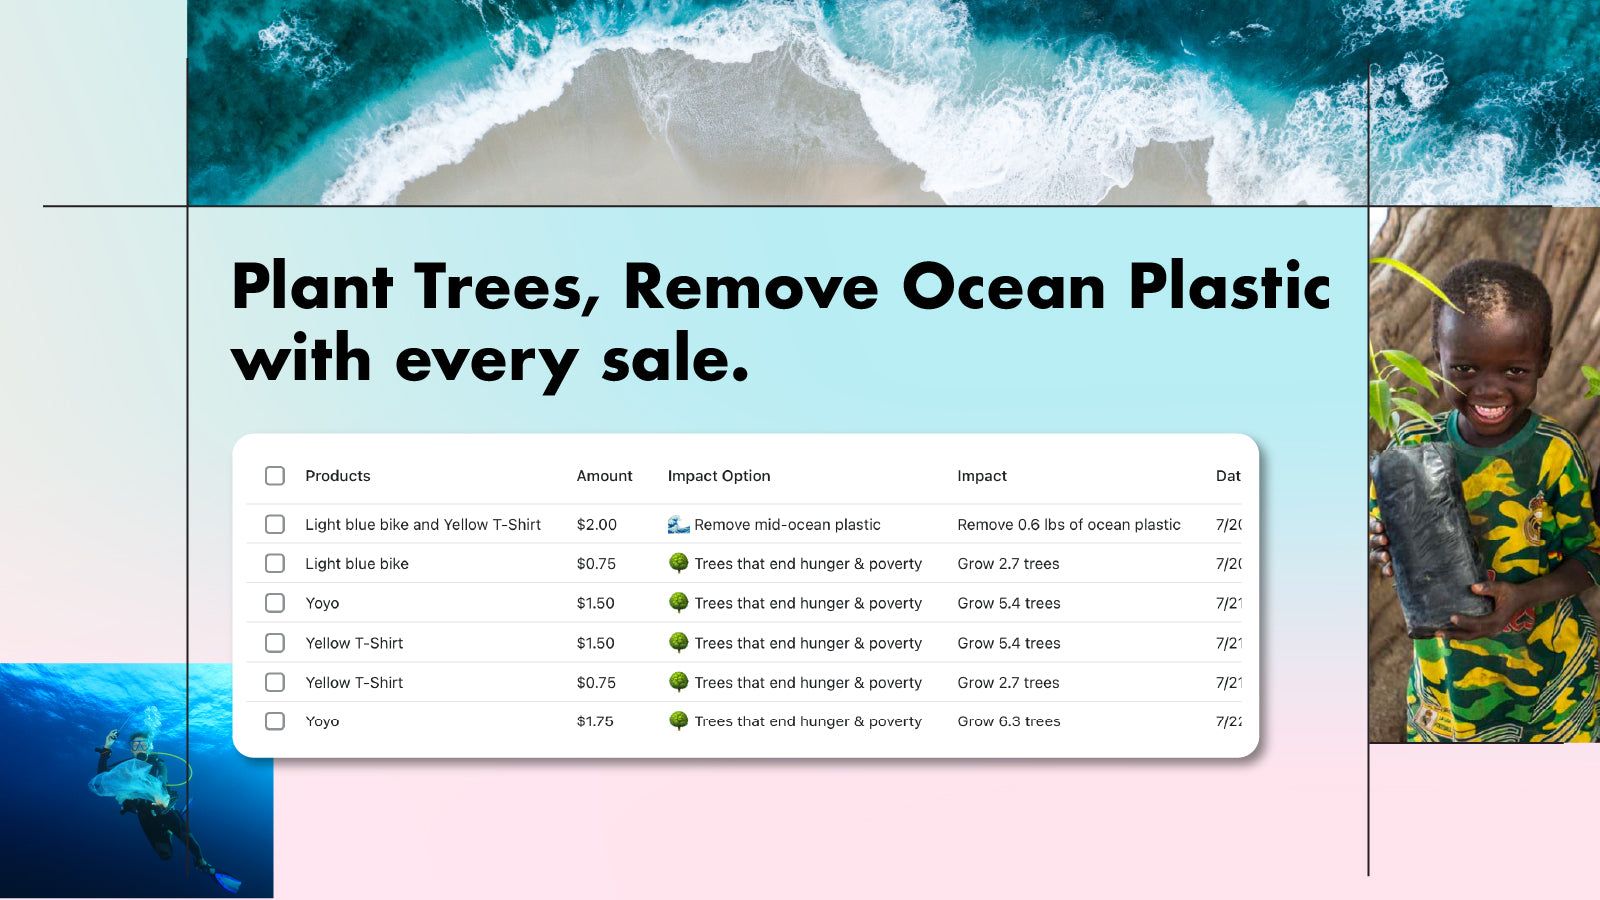 Plant Trees, Remove Ocean Plastic with every sale.